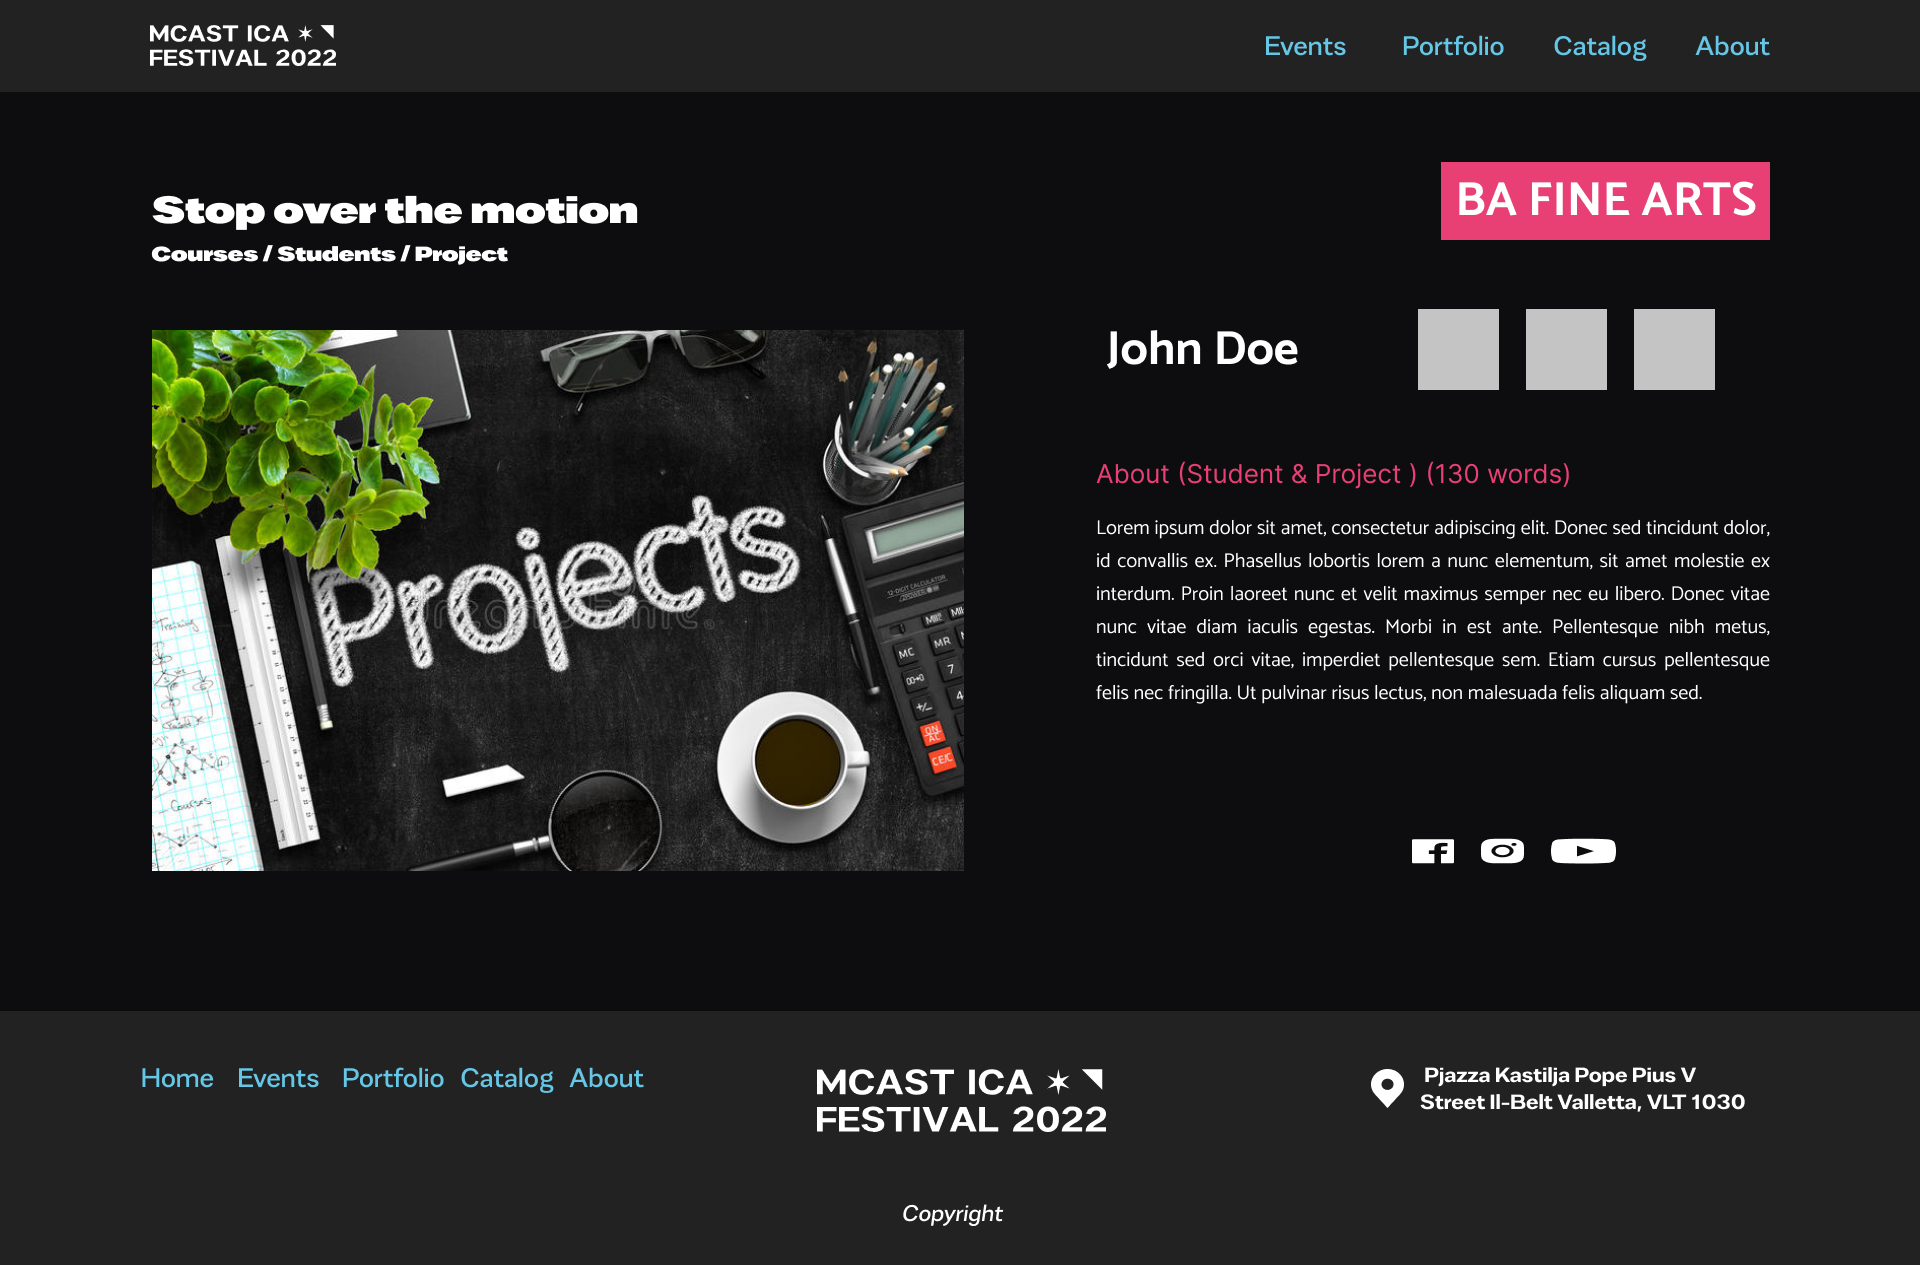 MCAST ICA Festival Projects details page